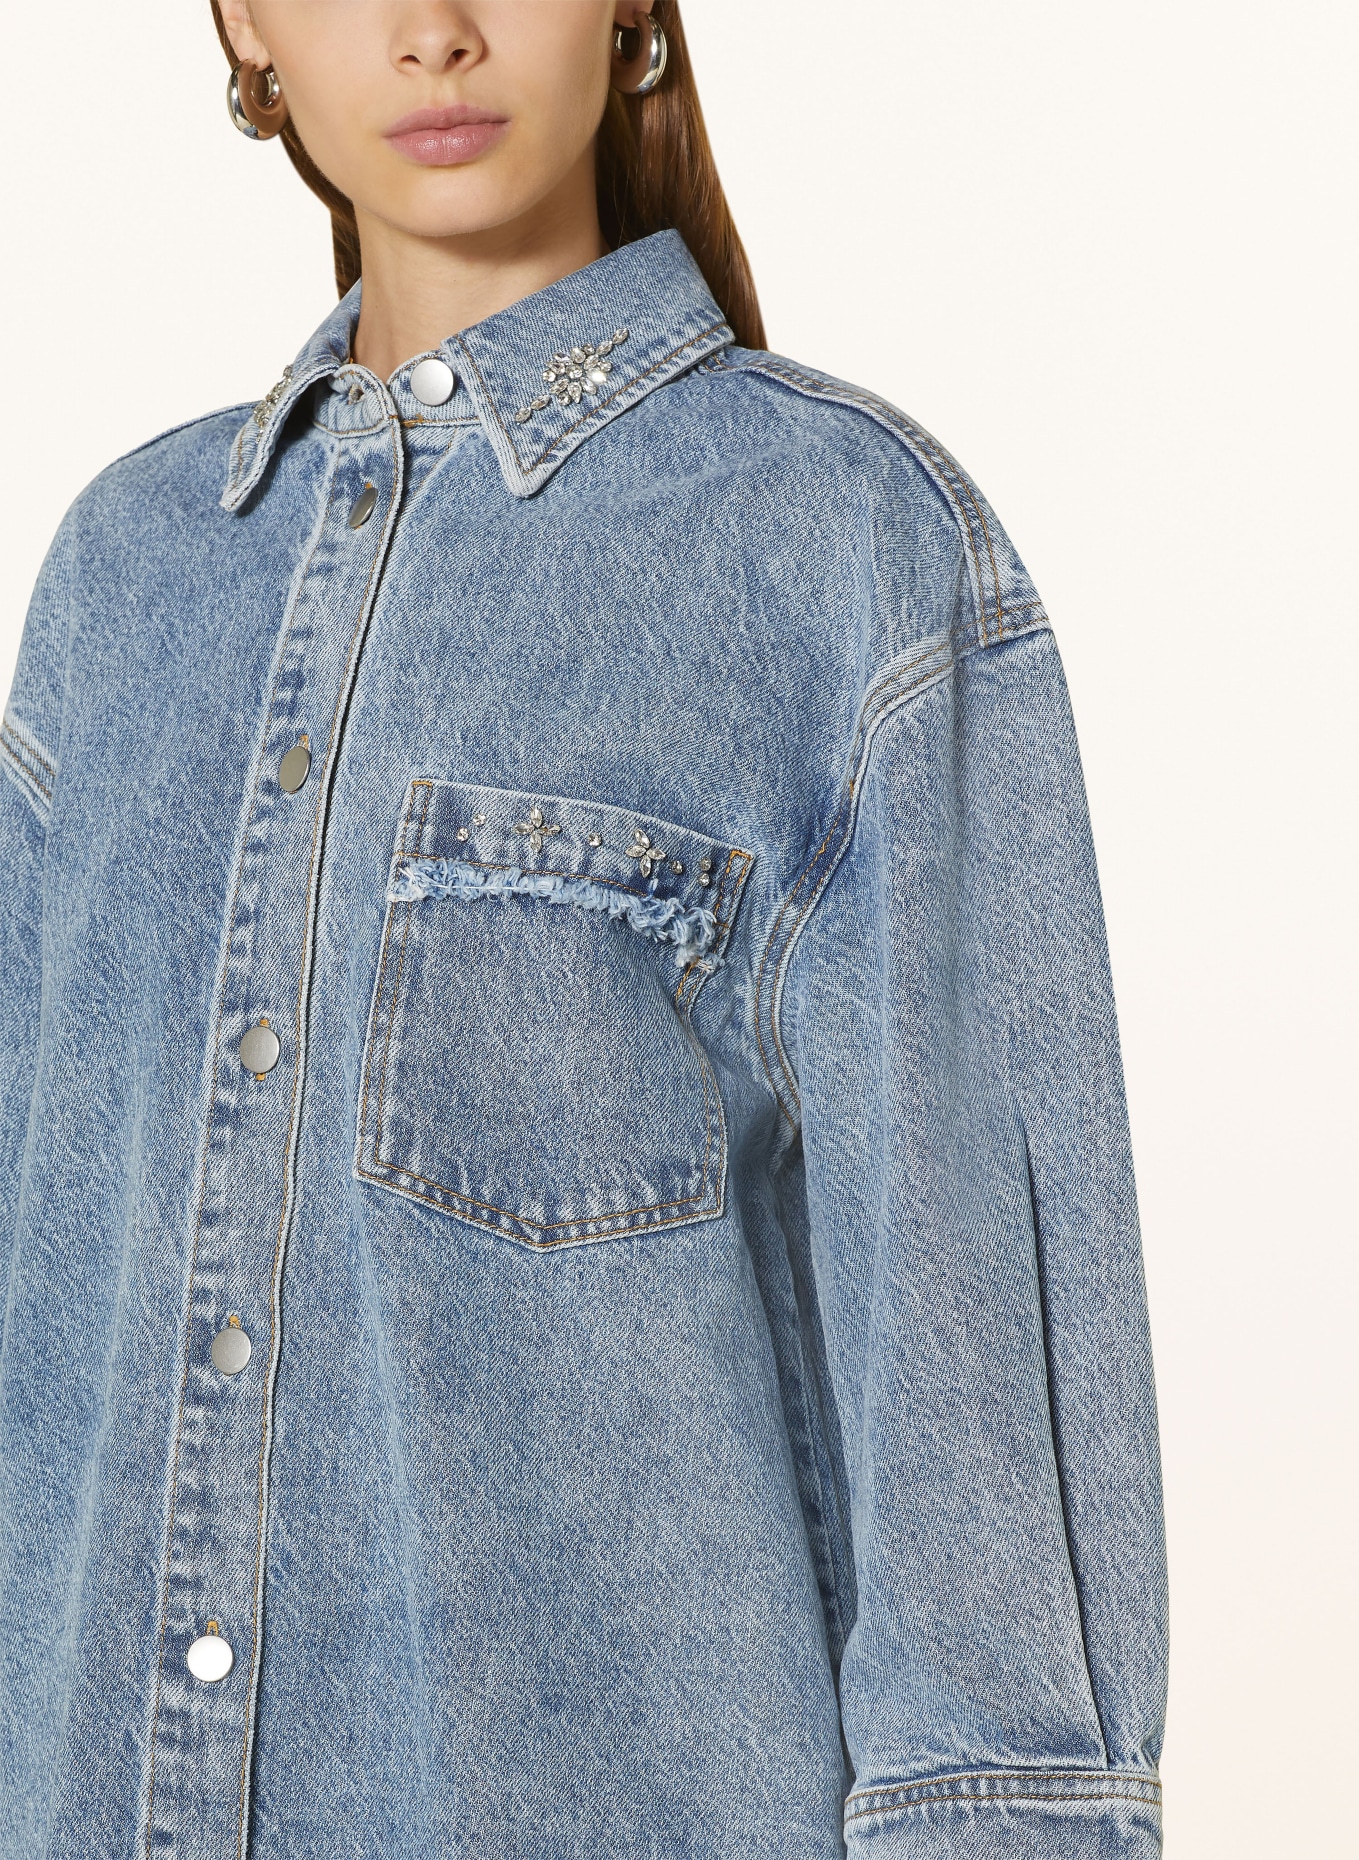 Y.A.S. Denim overshirt with 3/4 sleeves and decorative gems, Color: BLUE (Image 4)